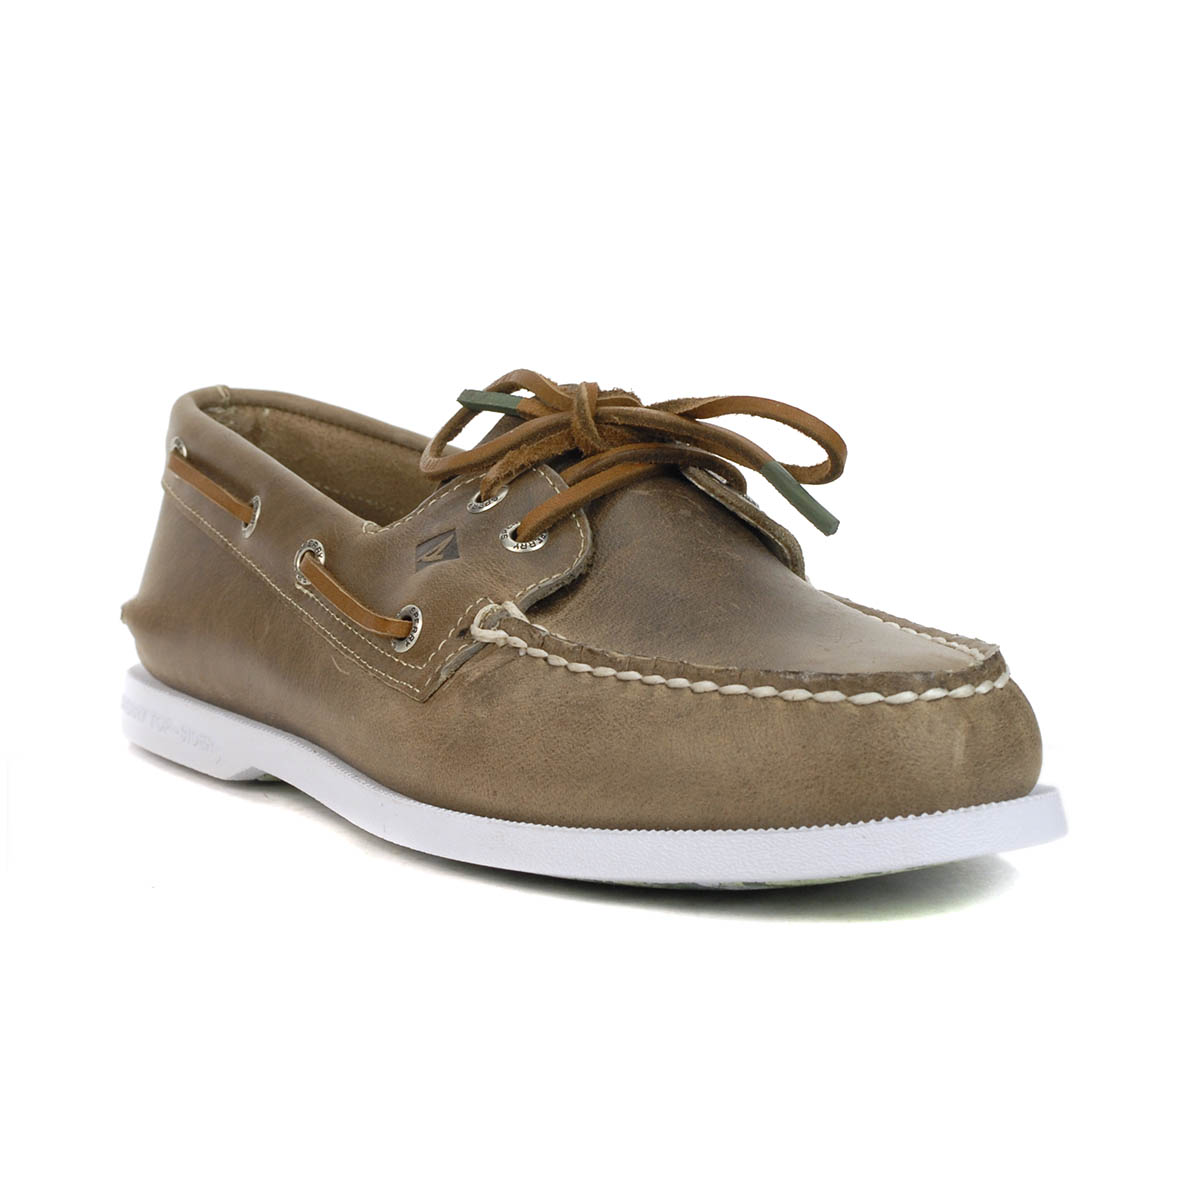 Sperry Men's Authentic Original Taupe Boat Shoes STS23932 - WOOKI.COM